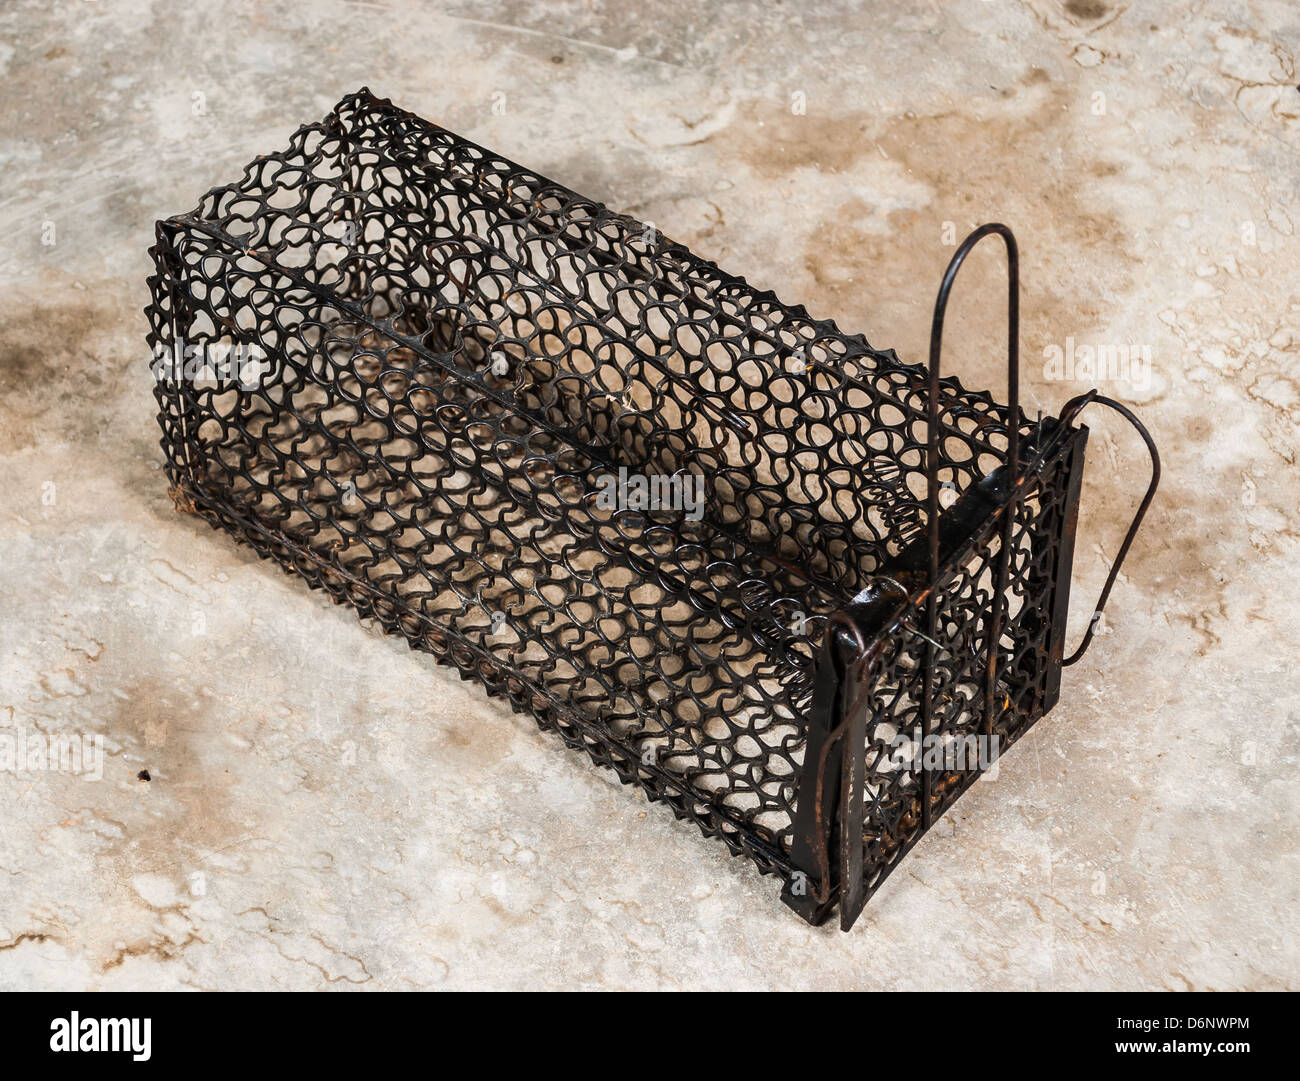 https://c8.alamy.com/comp/D6NWPM/black-mouse-trap-on-dirty-floor-D6NWPM.jpg